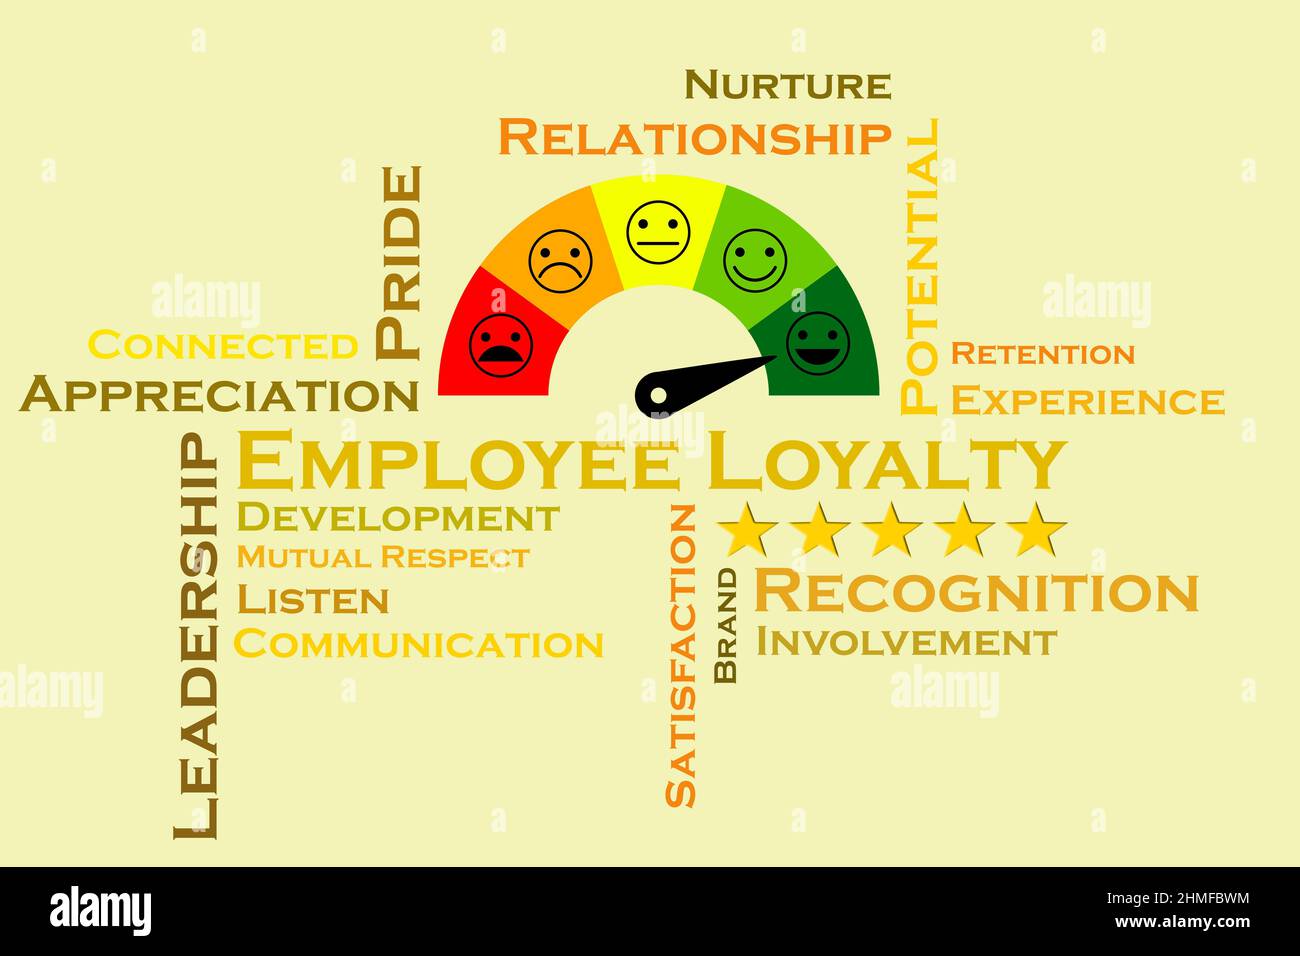 Employee Loyalty. Overview of the key terms and concepts with illustrative images. Stock Photo